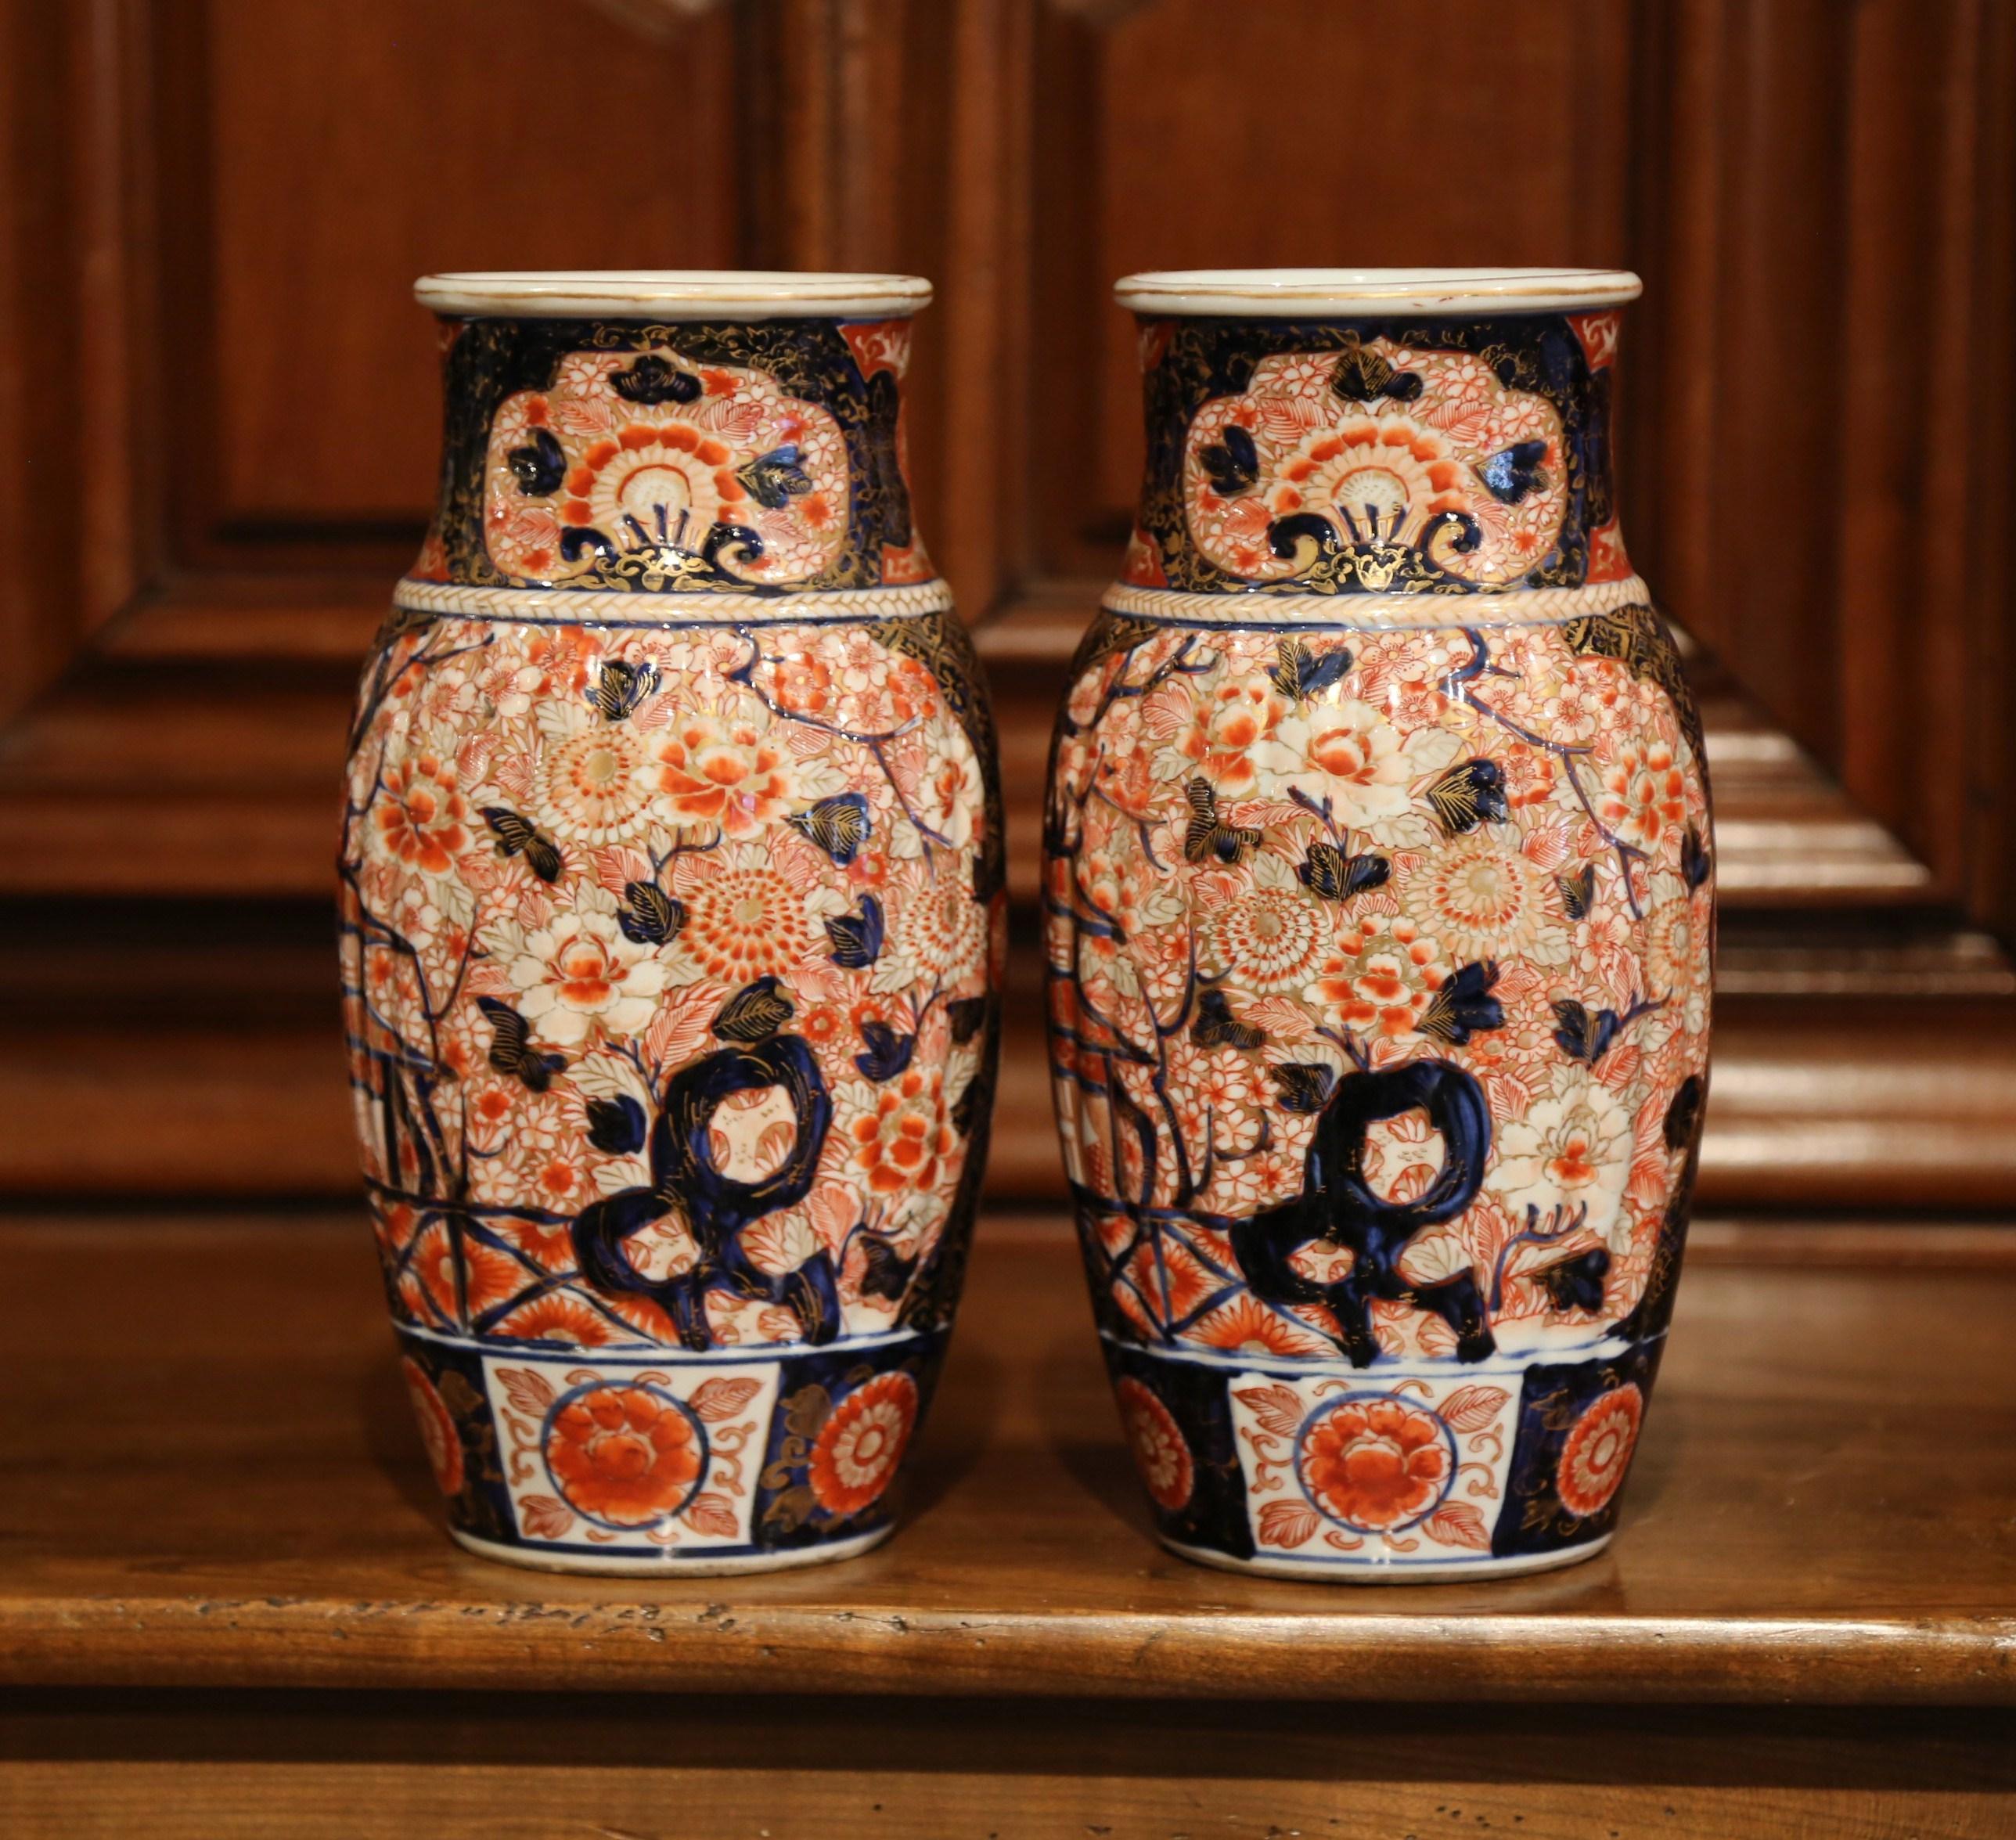 Pair of 19th Century Japanese Porcelain Imari Vases with Floral Decor 1